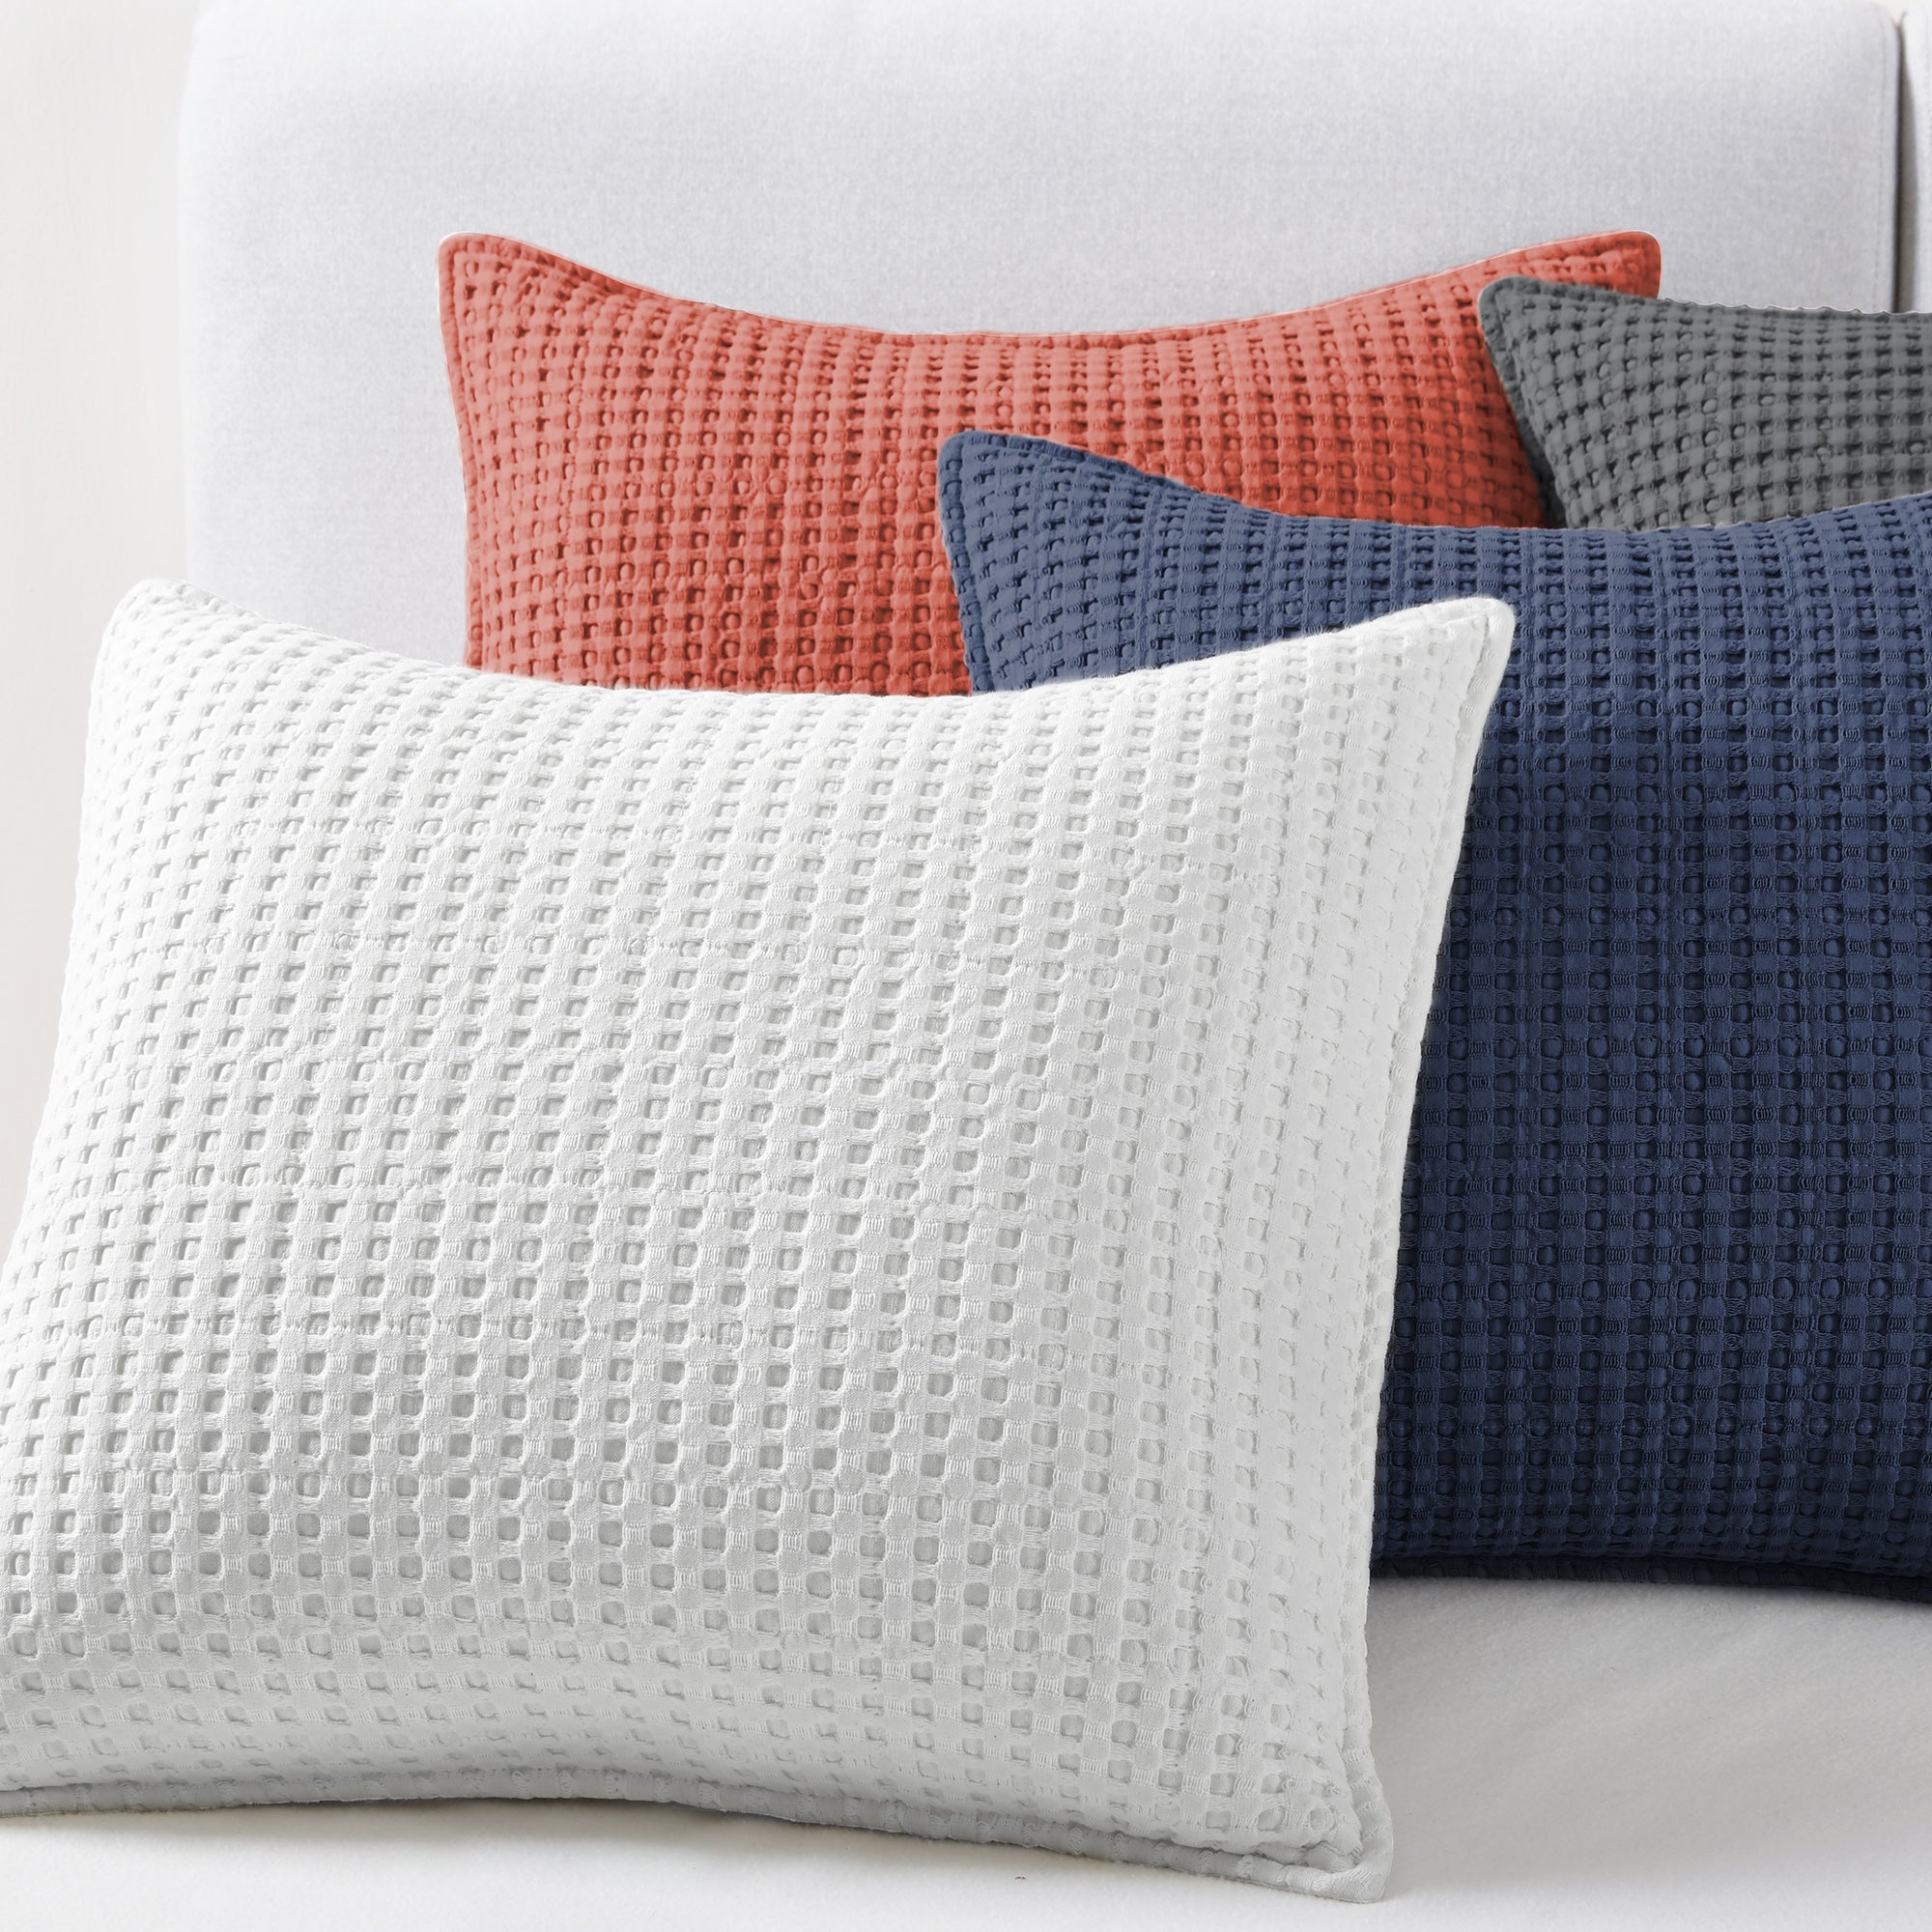 Levtex Home Mills Waffle Grey Square Pillow